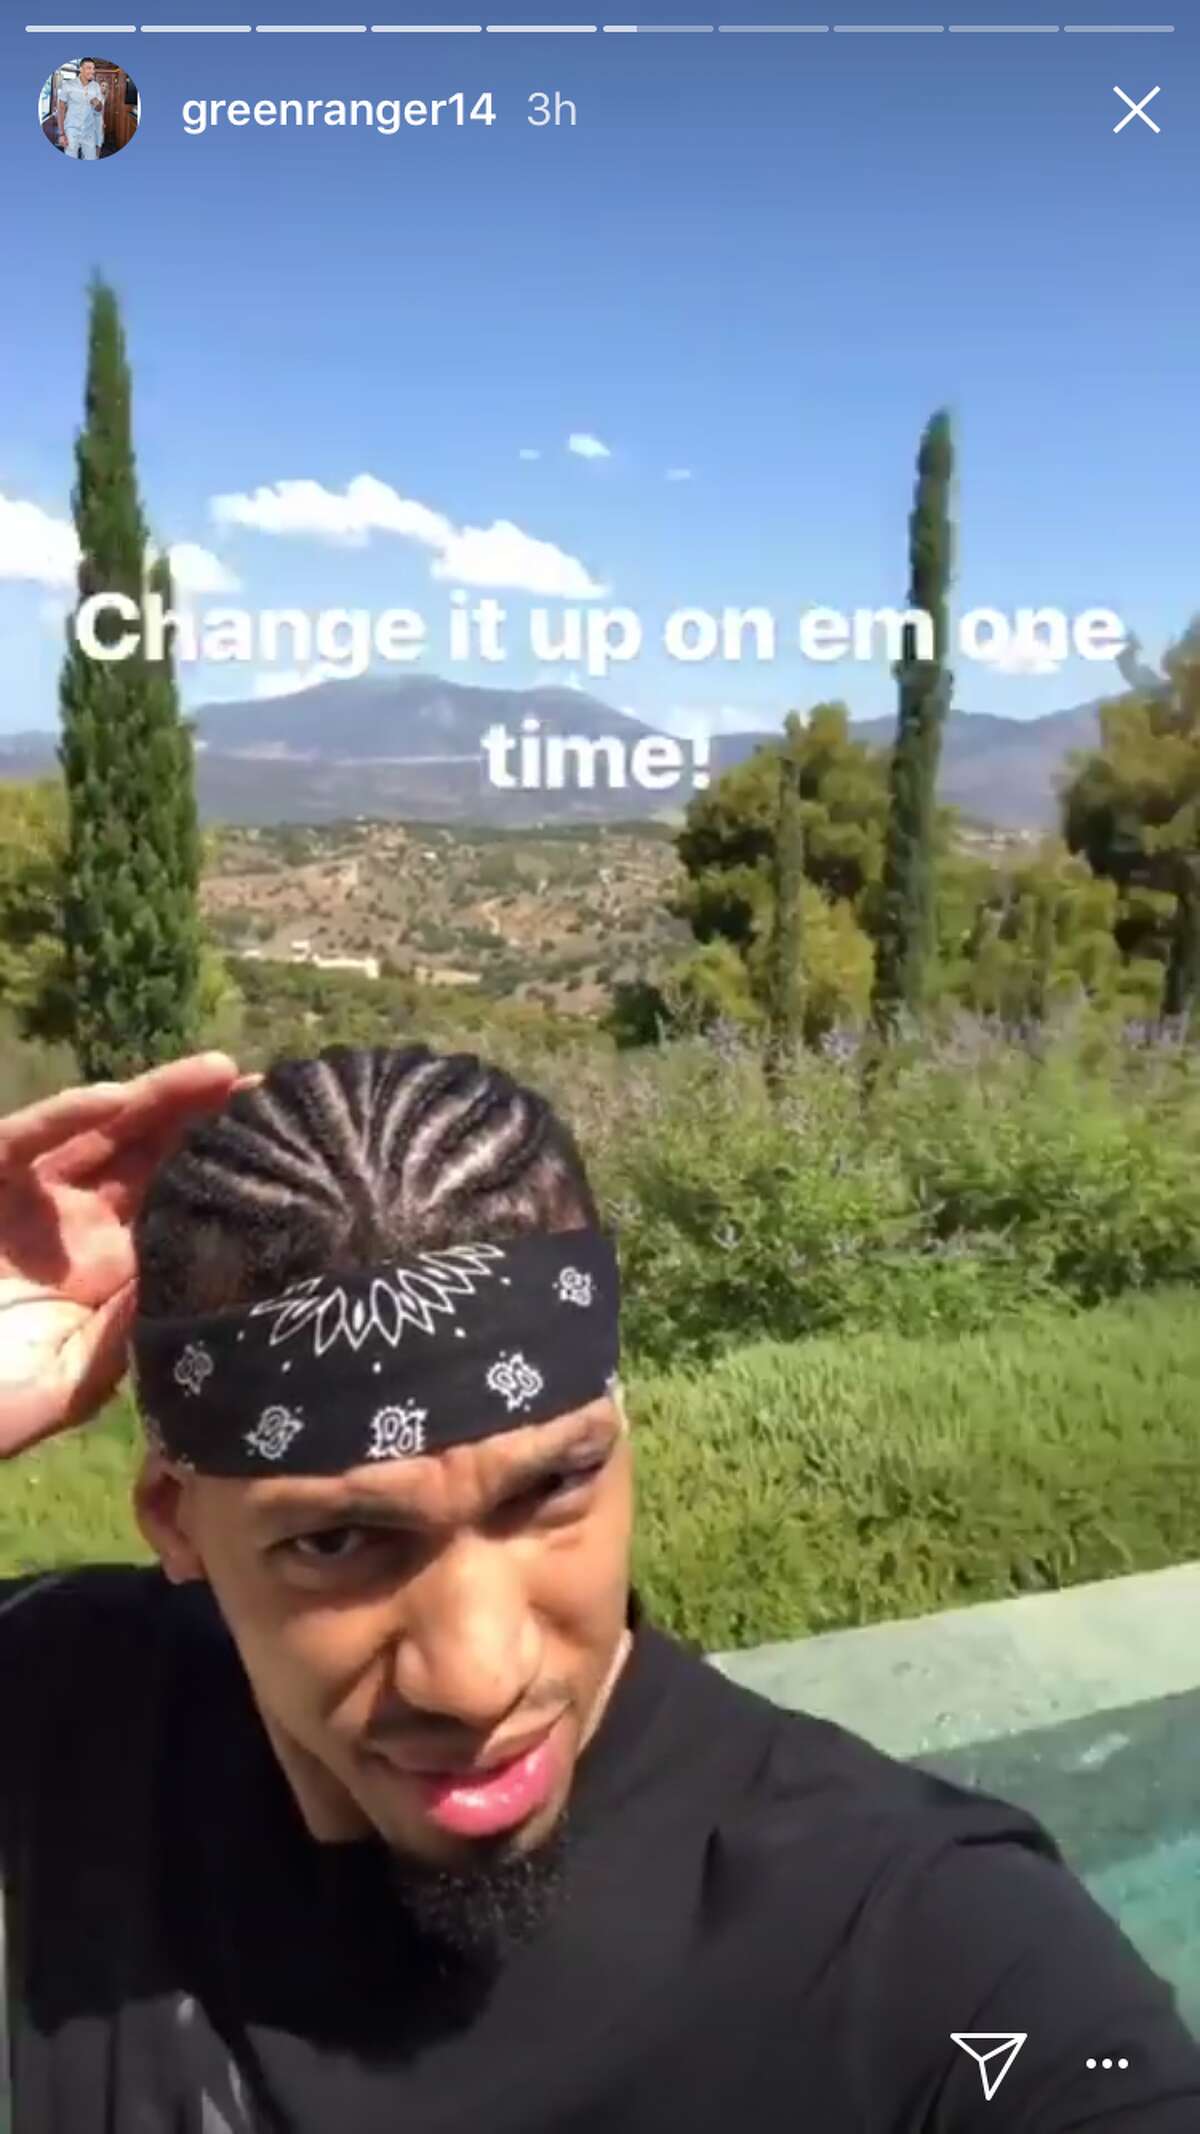 The Spurs guard shared a series of Instagram stories videos showing off his voyage to Amanzoe, in Porto Heli, Greece and a cornrowed hairstyle Thursday morning.